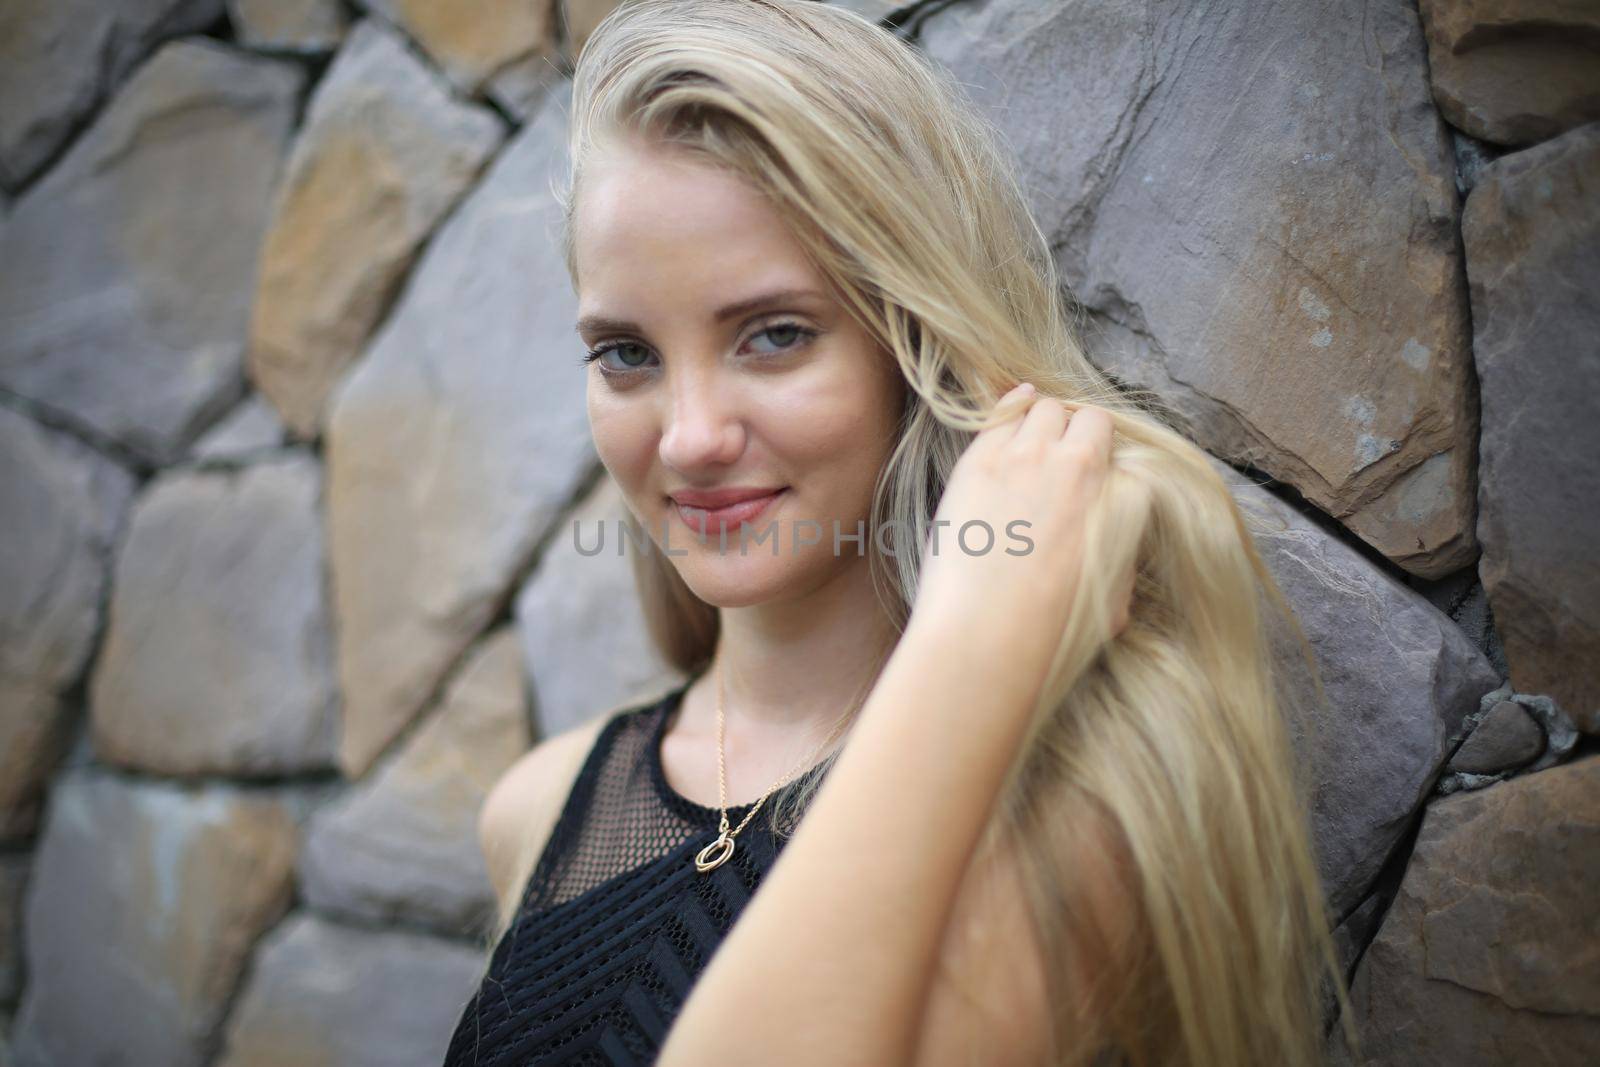 Portrait of Beautiful blonde hair girl on black dress against stone wall as fashion portrait outdoor.